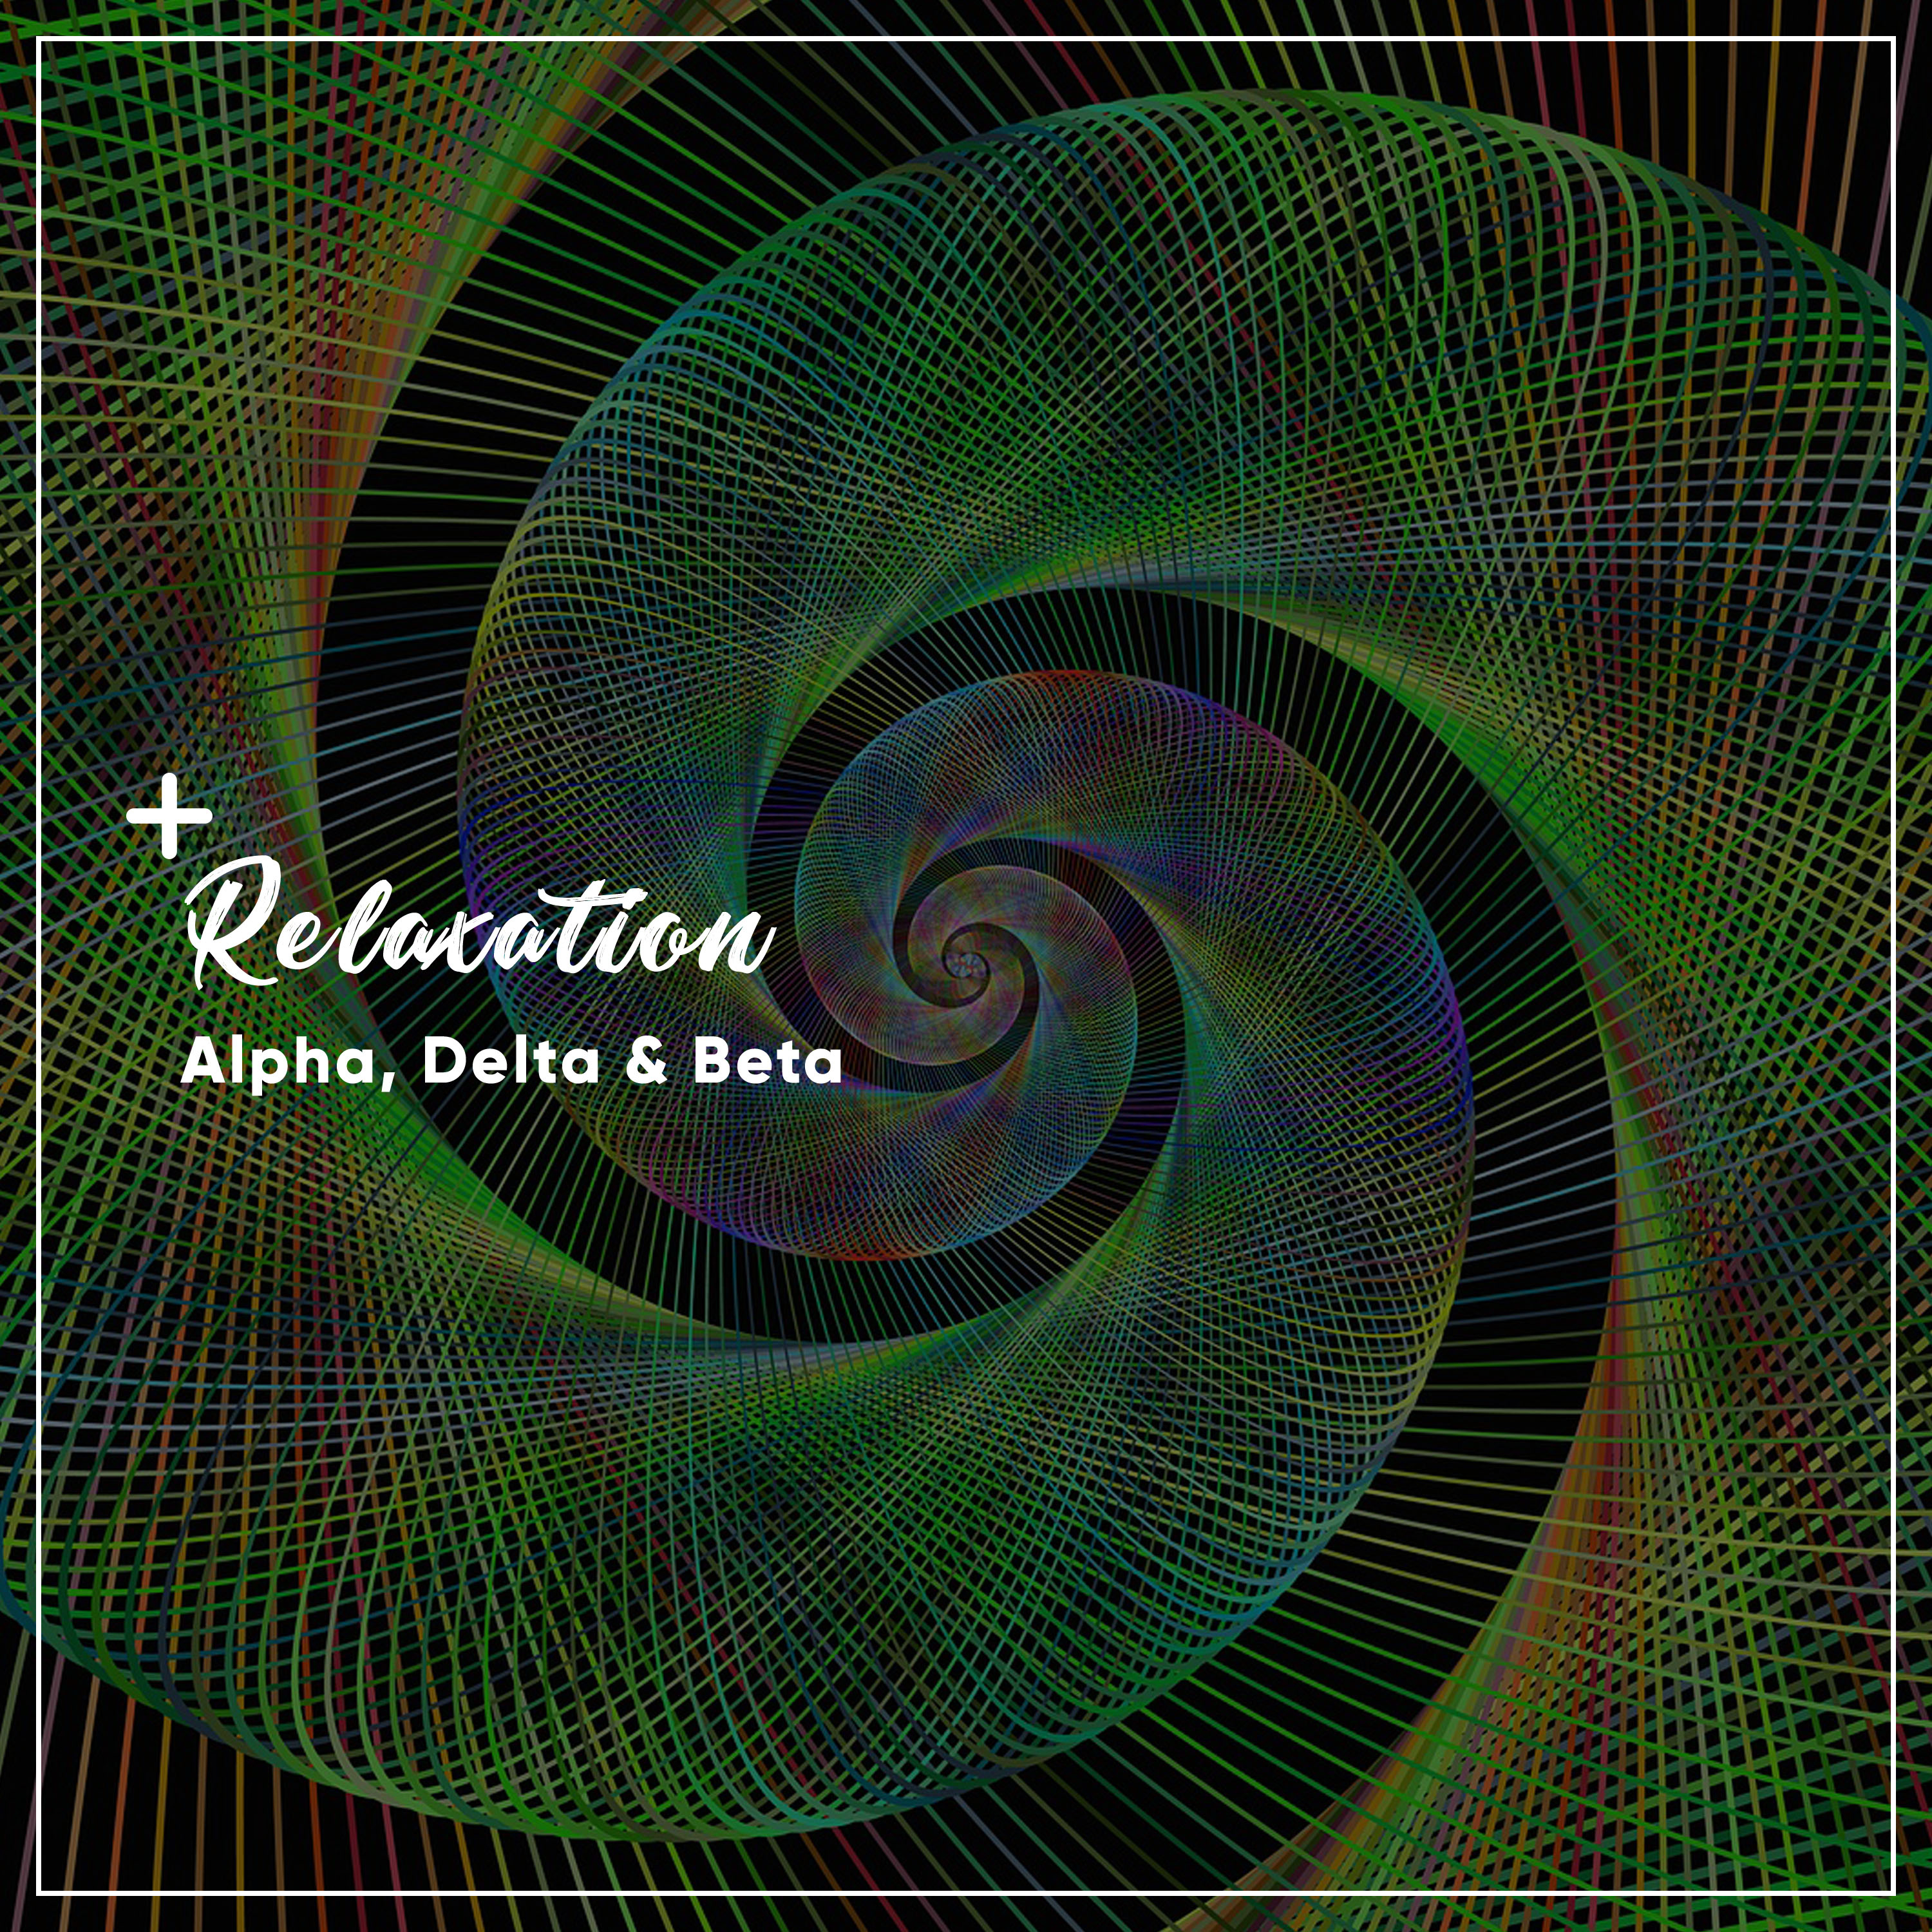 Brownian Deep Relaxation and Inner Peace (Theta Waves) - Loopable